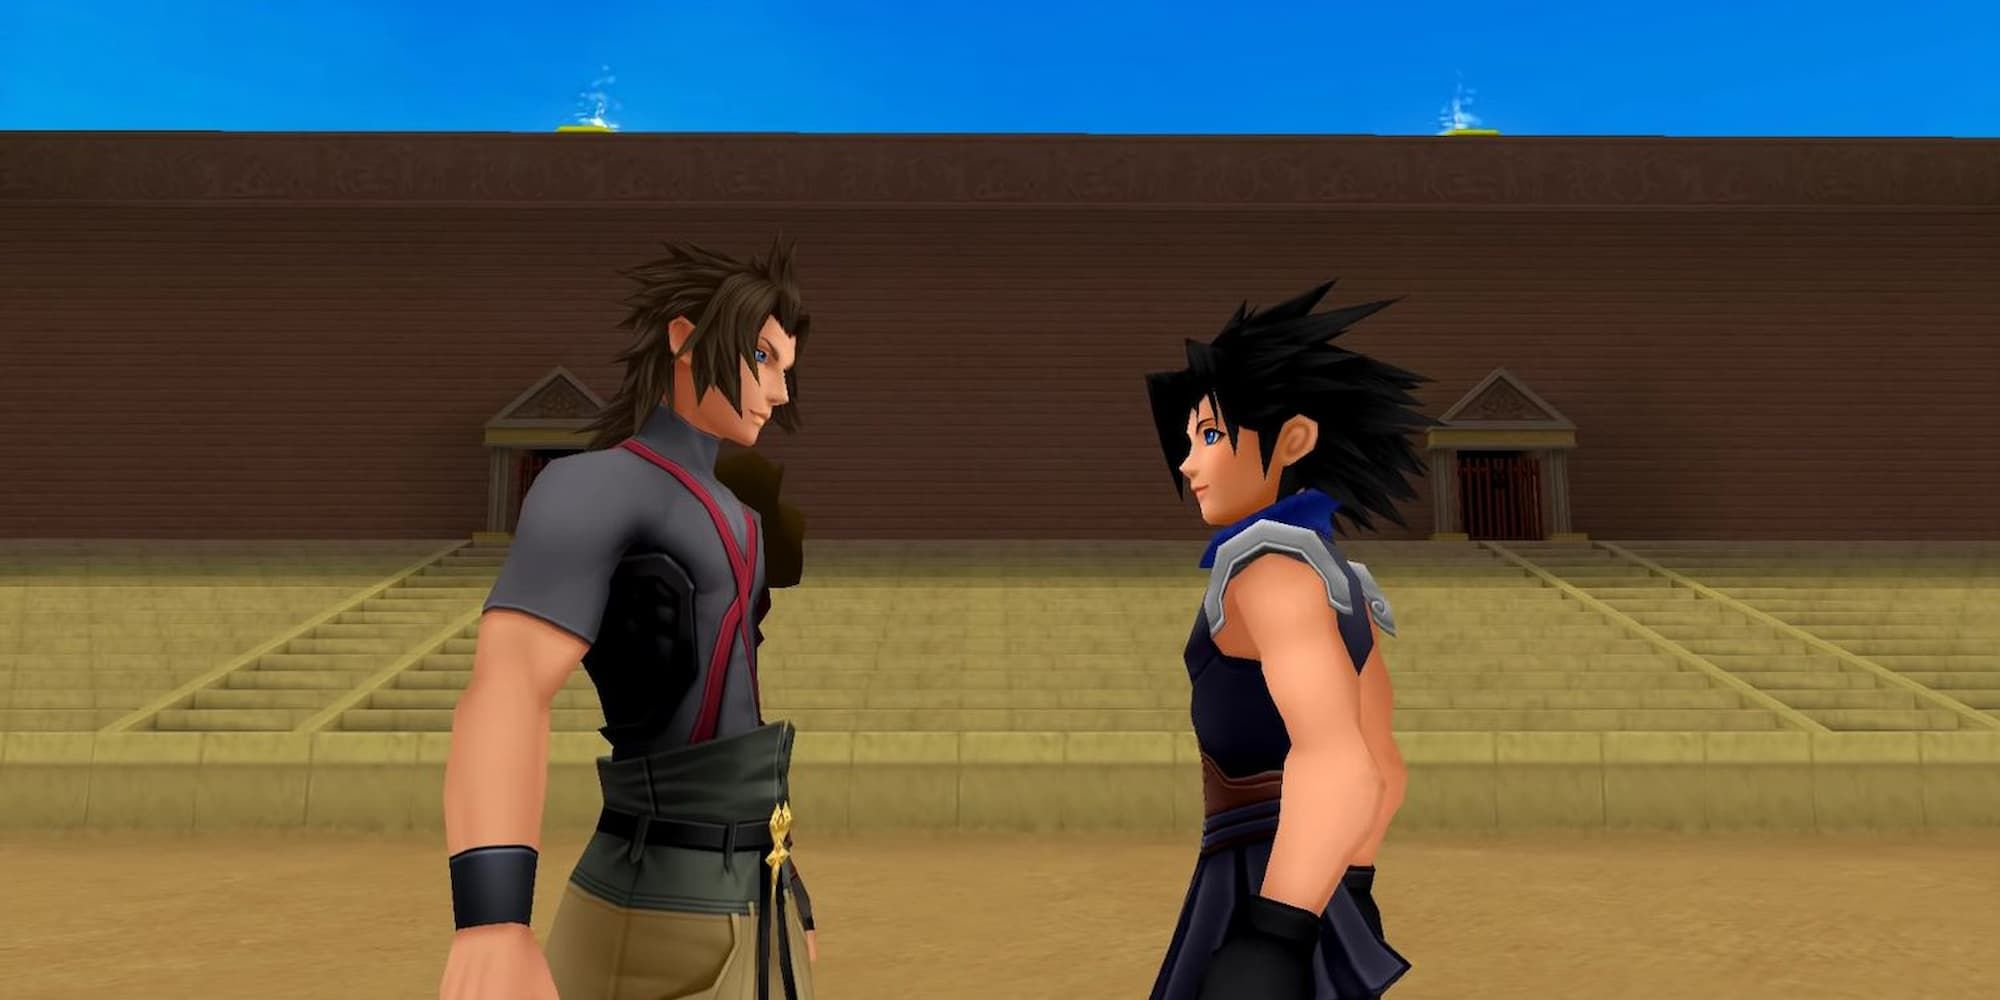 Zack and Terra facing each other with a smile